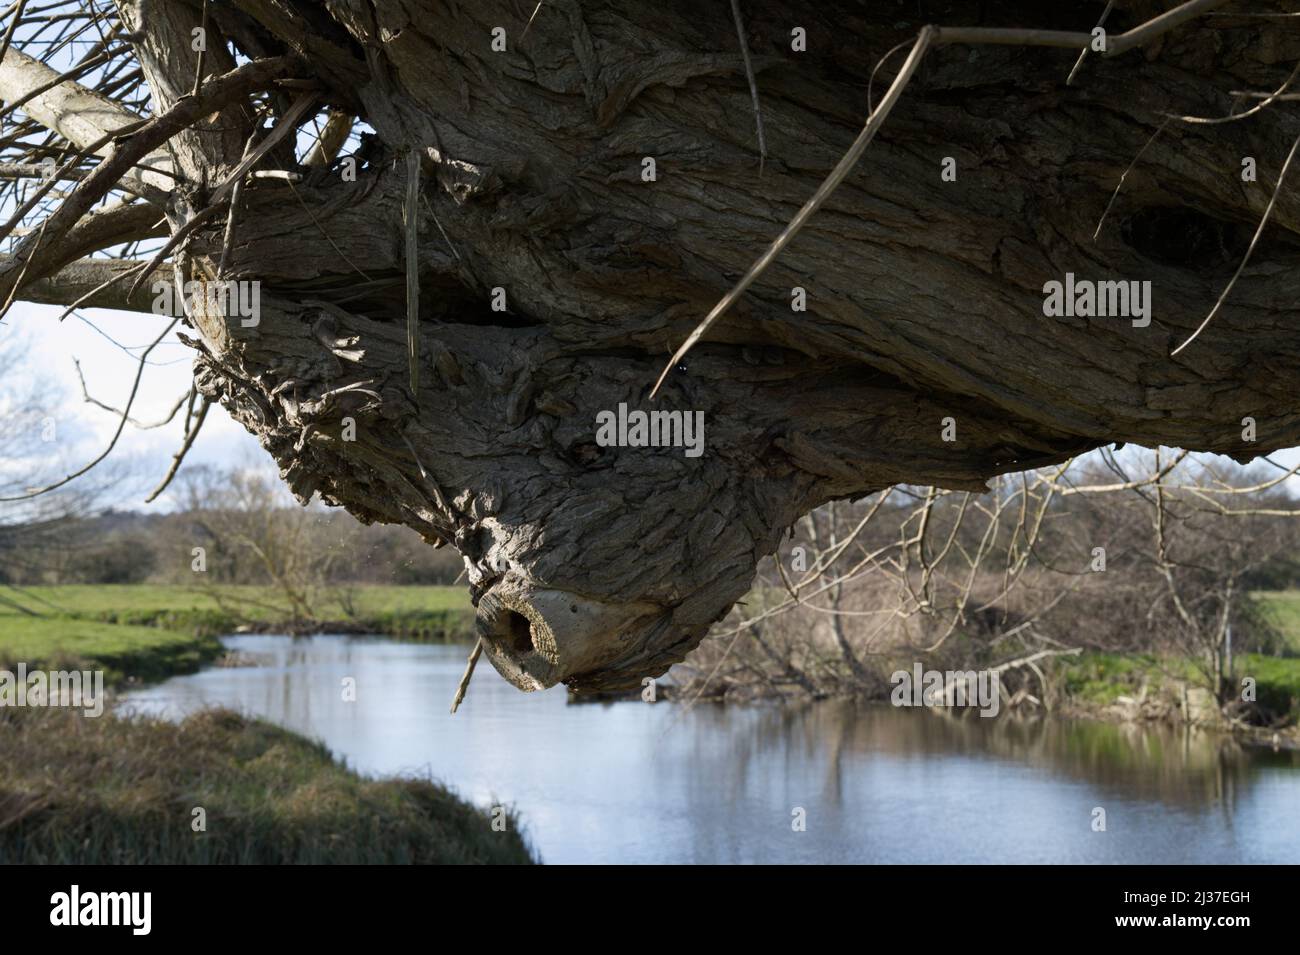 Snout-like face formed by the bark on a tree trunk Stock Photo